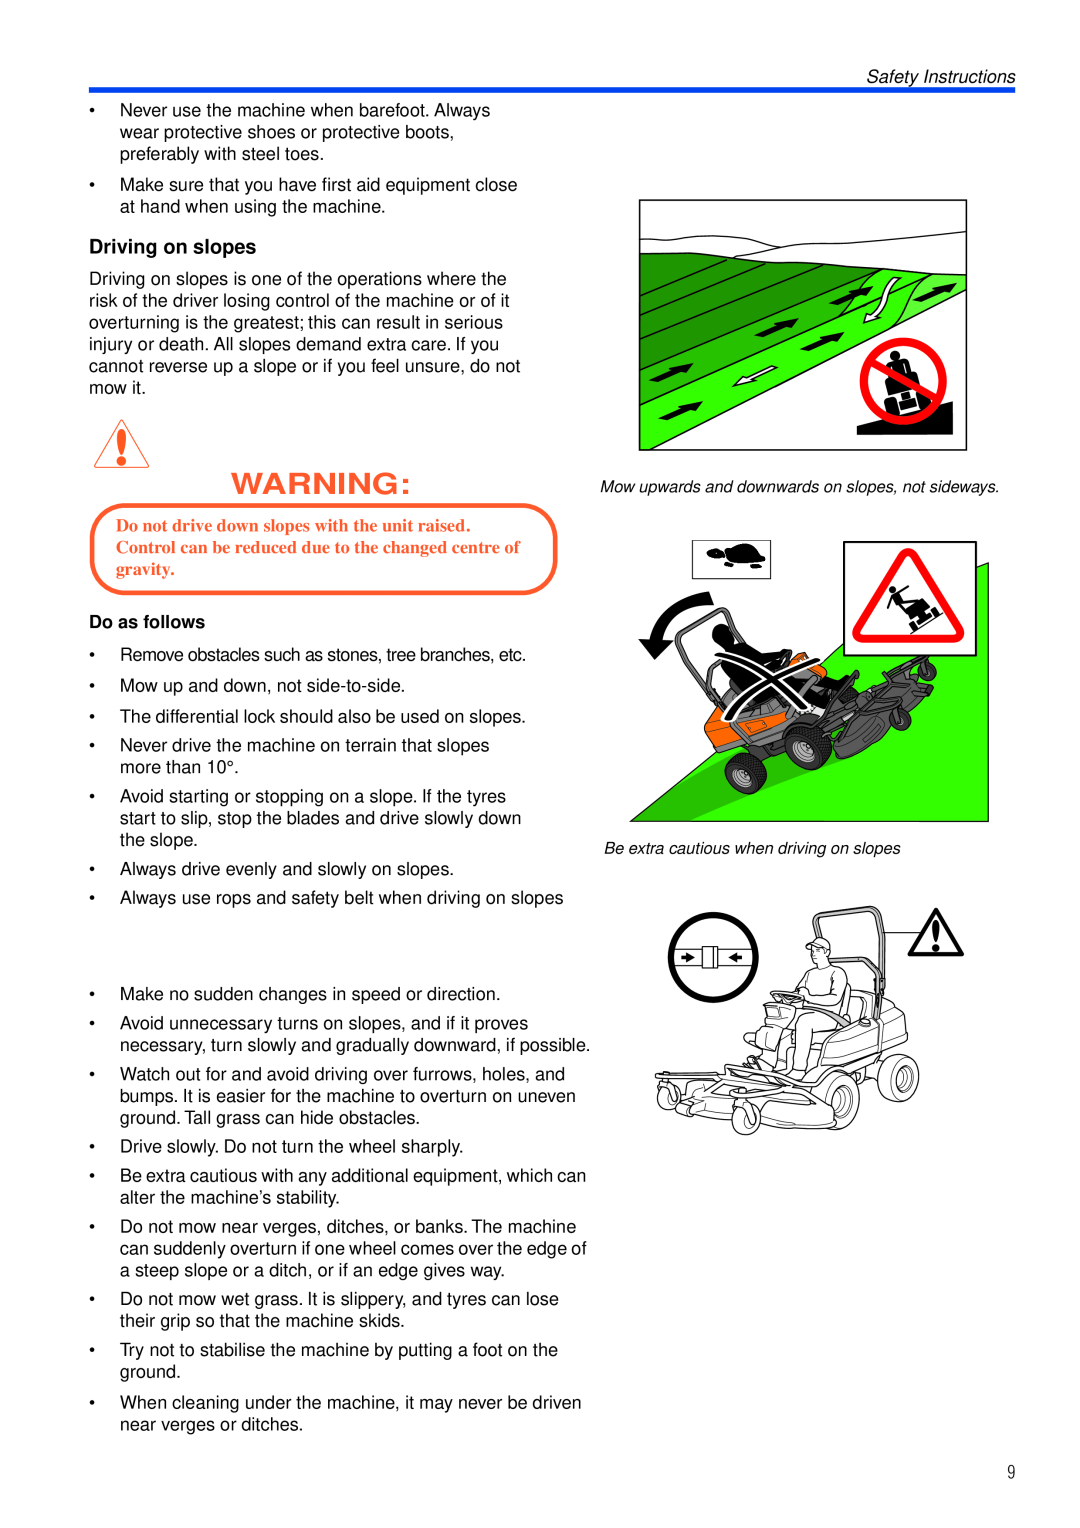 Husqvarna PT26 D manual Driving on slopes, Do as follows, Safety Instructions 